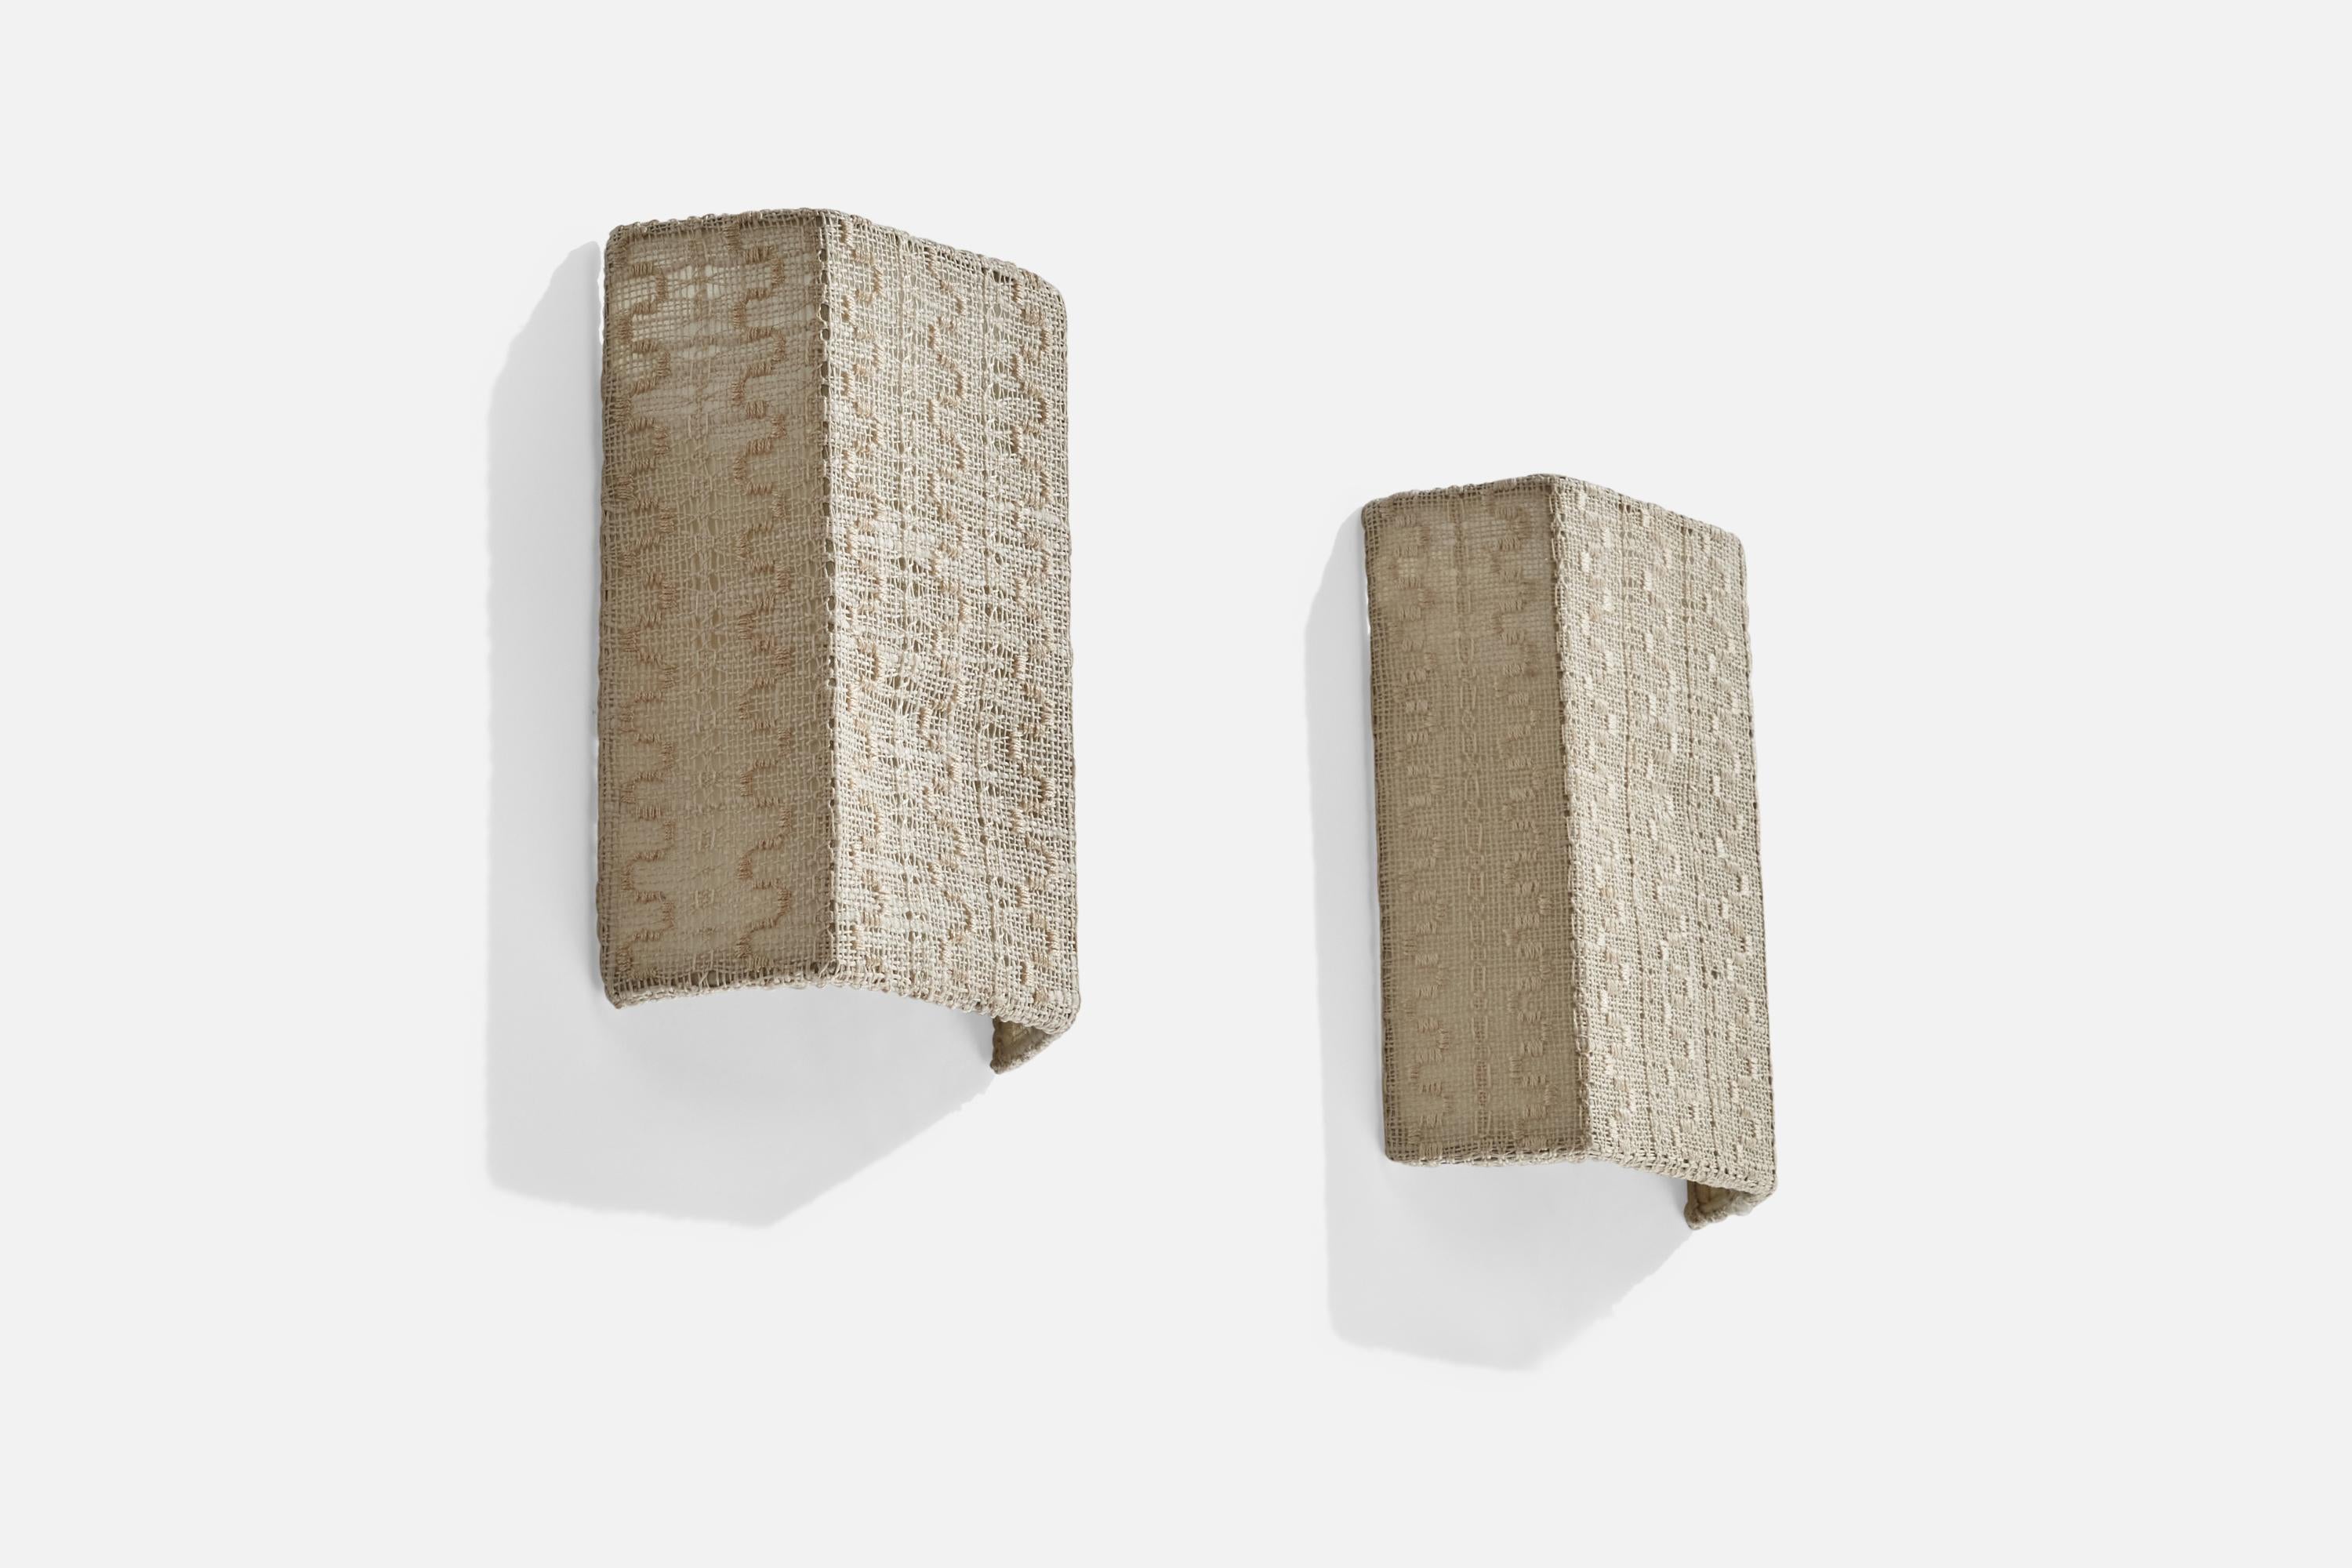 A pair of off-white embroidery fabric wall lights designed and produced in Sweden, 1950s. 

Overall Dimensions (inches): 10” H x 7.25” W x 2.5” D
Back Plate Dimensions (inches): N/A
Bulb Specifications: E-14 Bulb
Number of Sockets: 2
All lighting